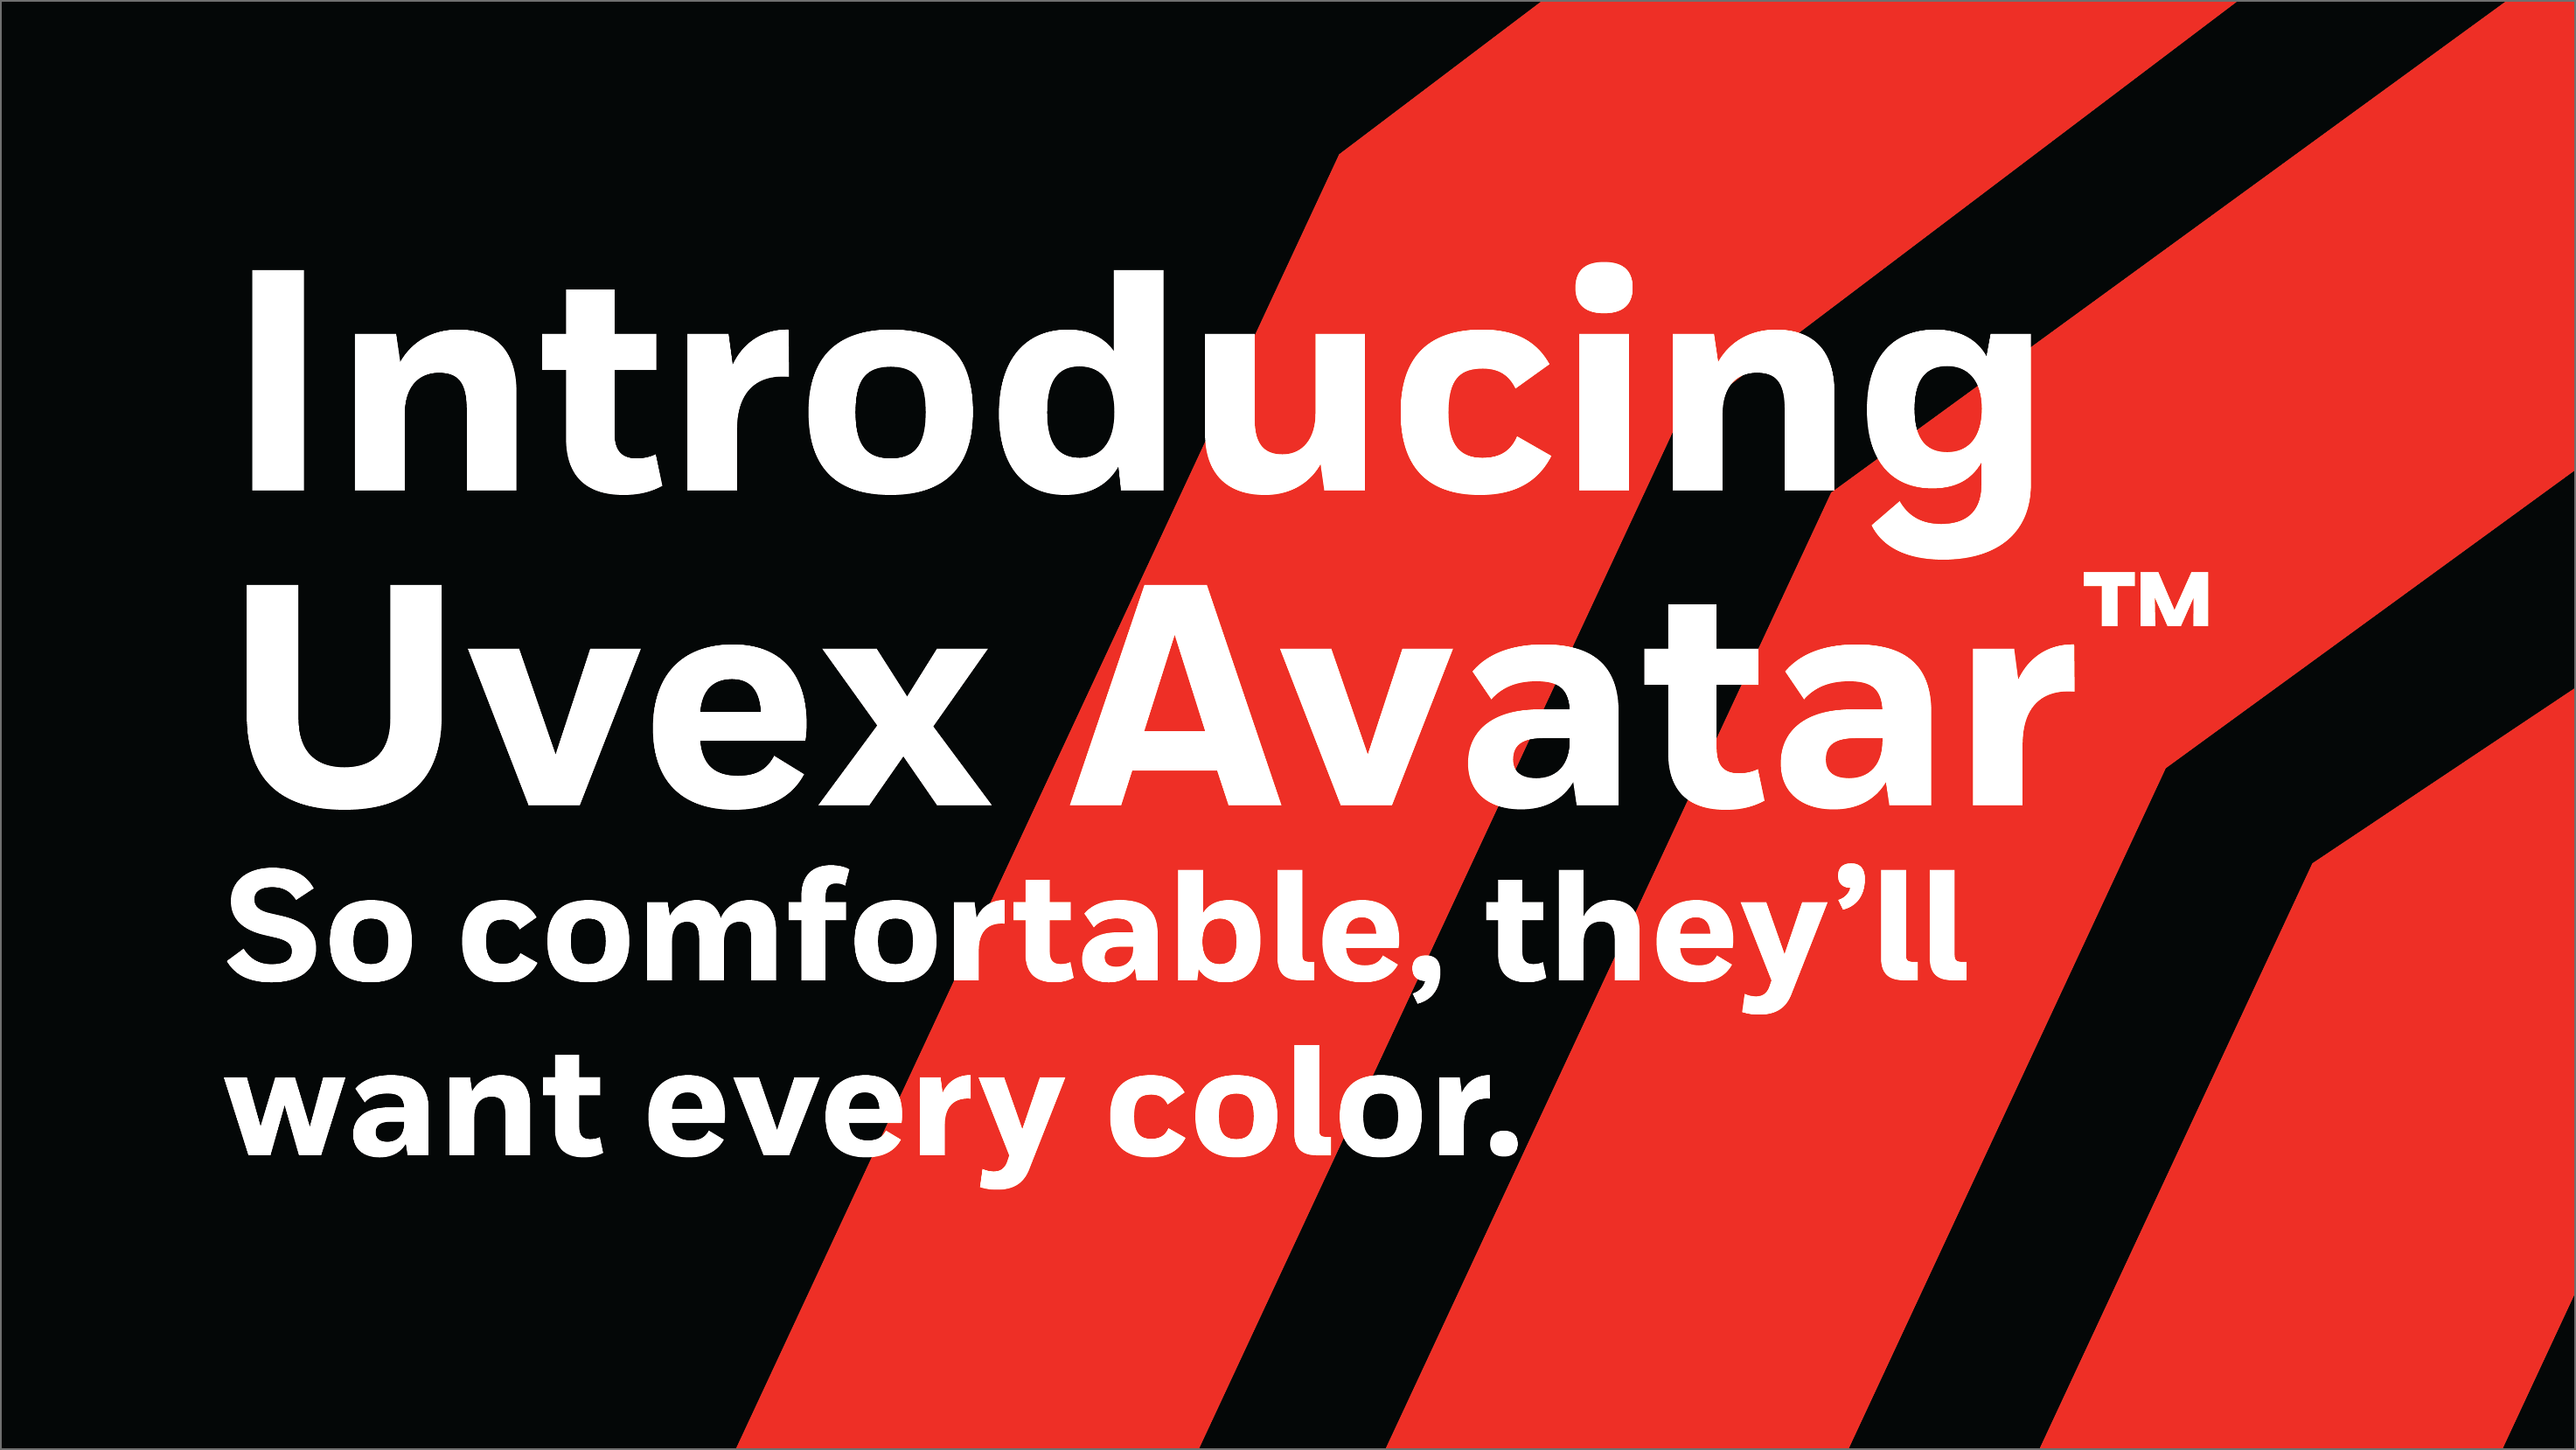 Introducing Uvex AvatarTM So comfortable, they'll want every color.